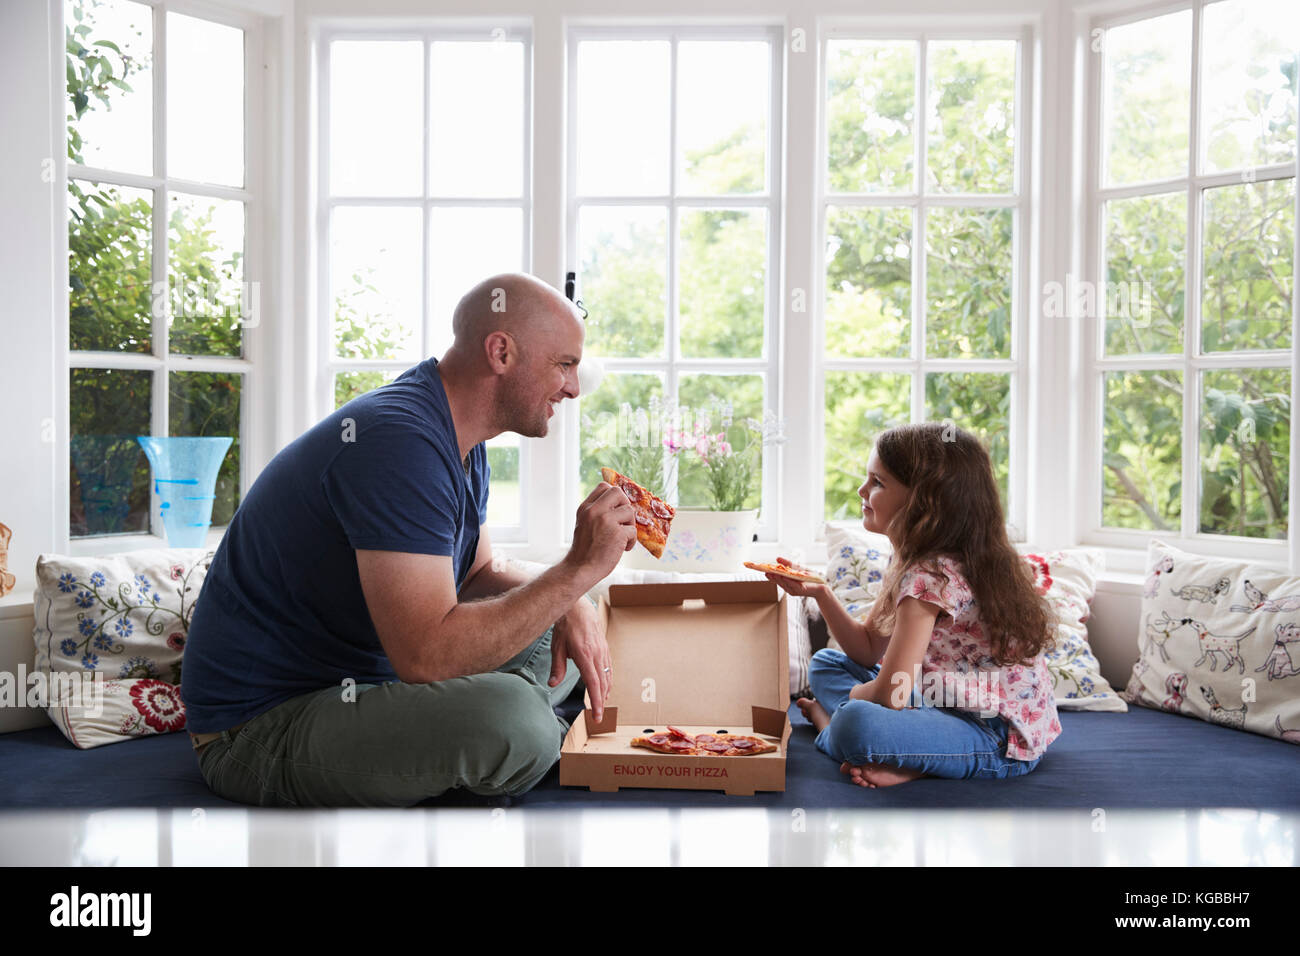 Dad and daughter sit on window seat at home sharing a pizza Stock Photo